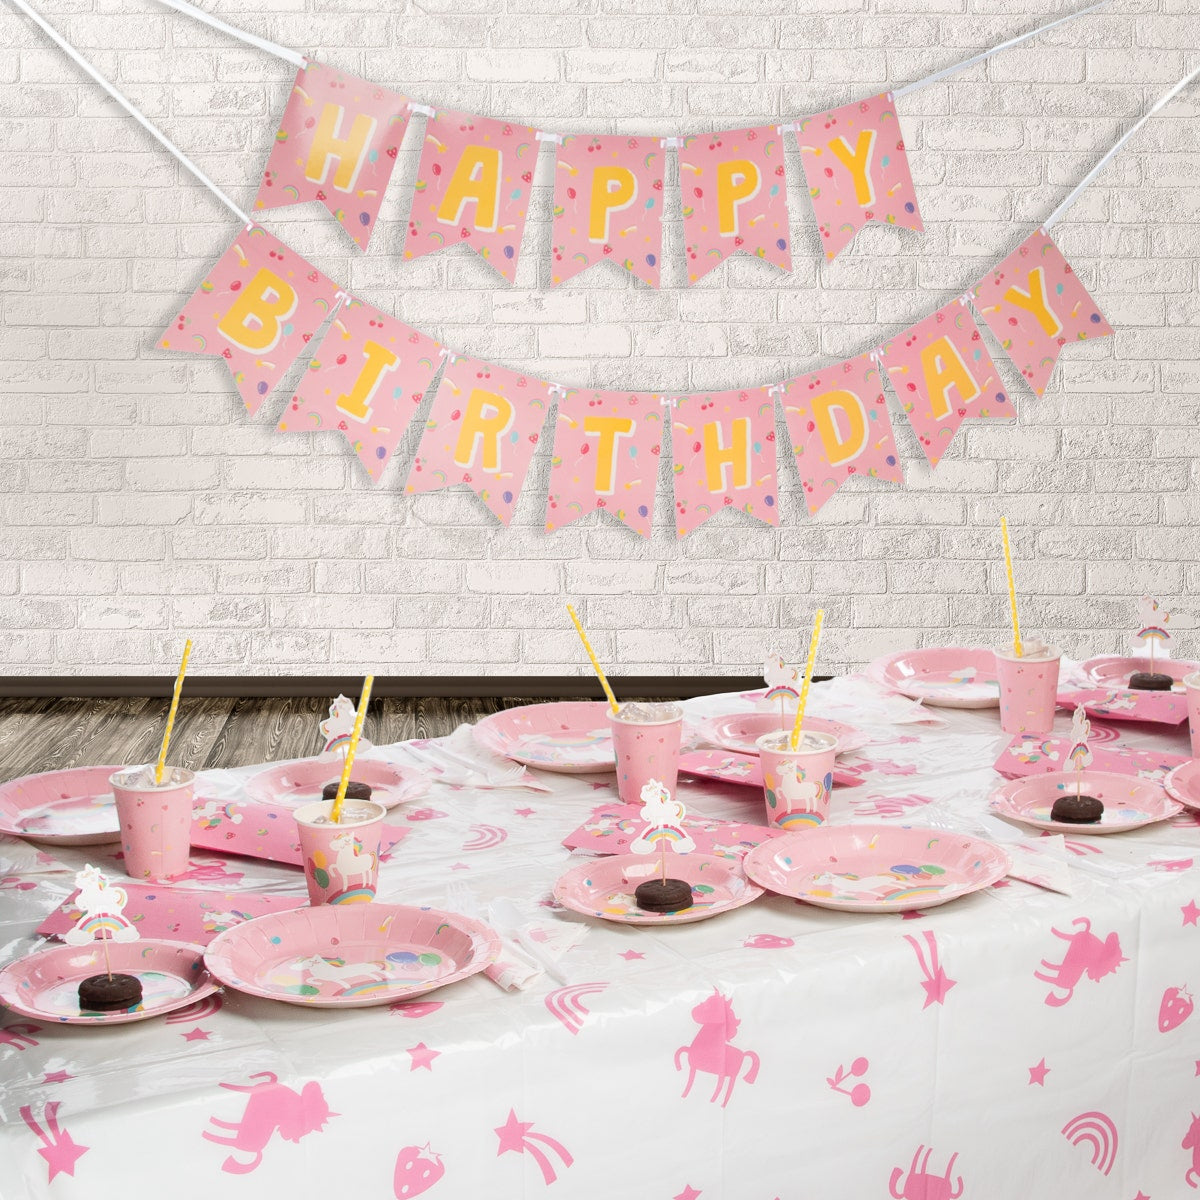 110pc Unicorn Birthday Party Supplies & Décor Kit For 12 Guests